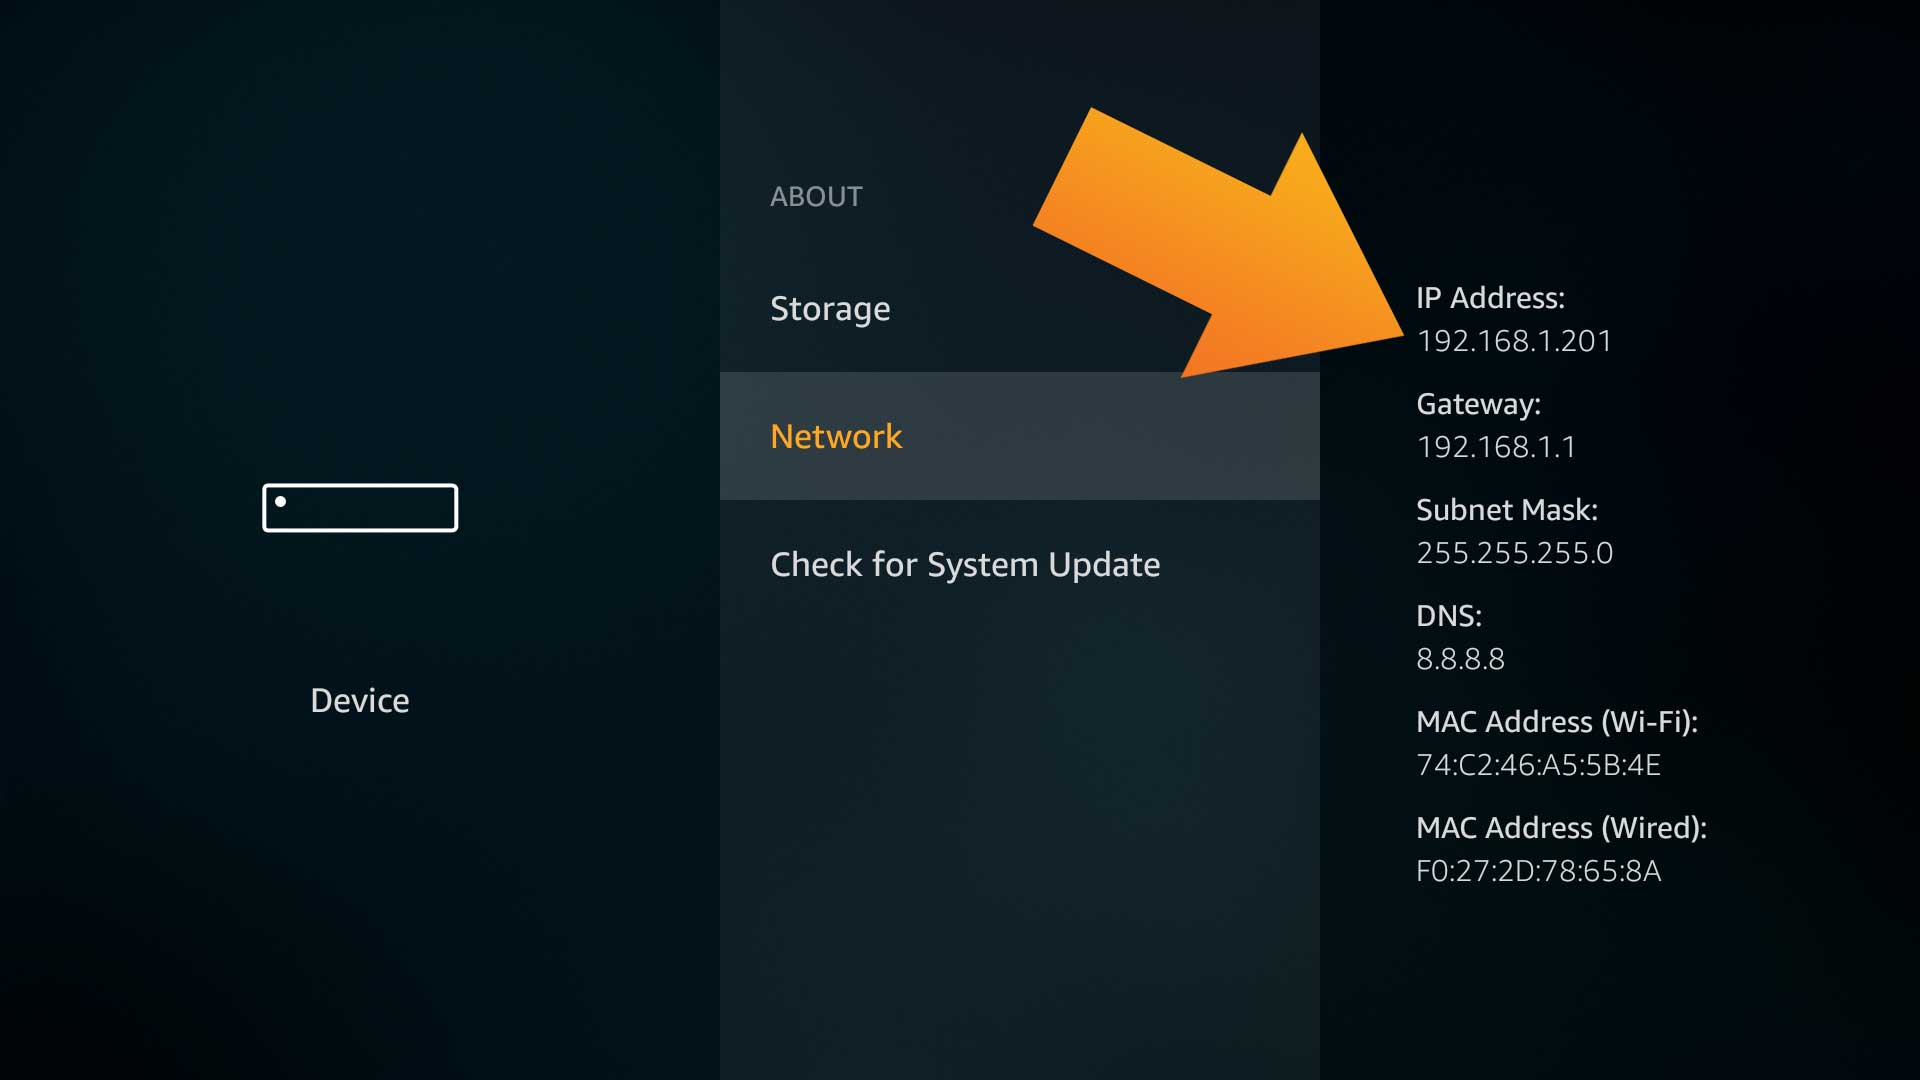 how to find mac address for vizio tv